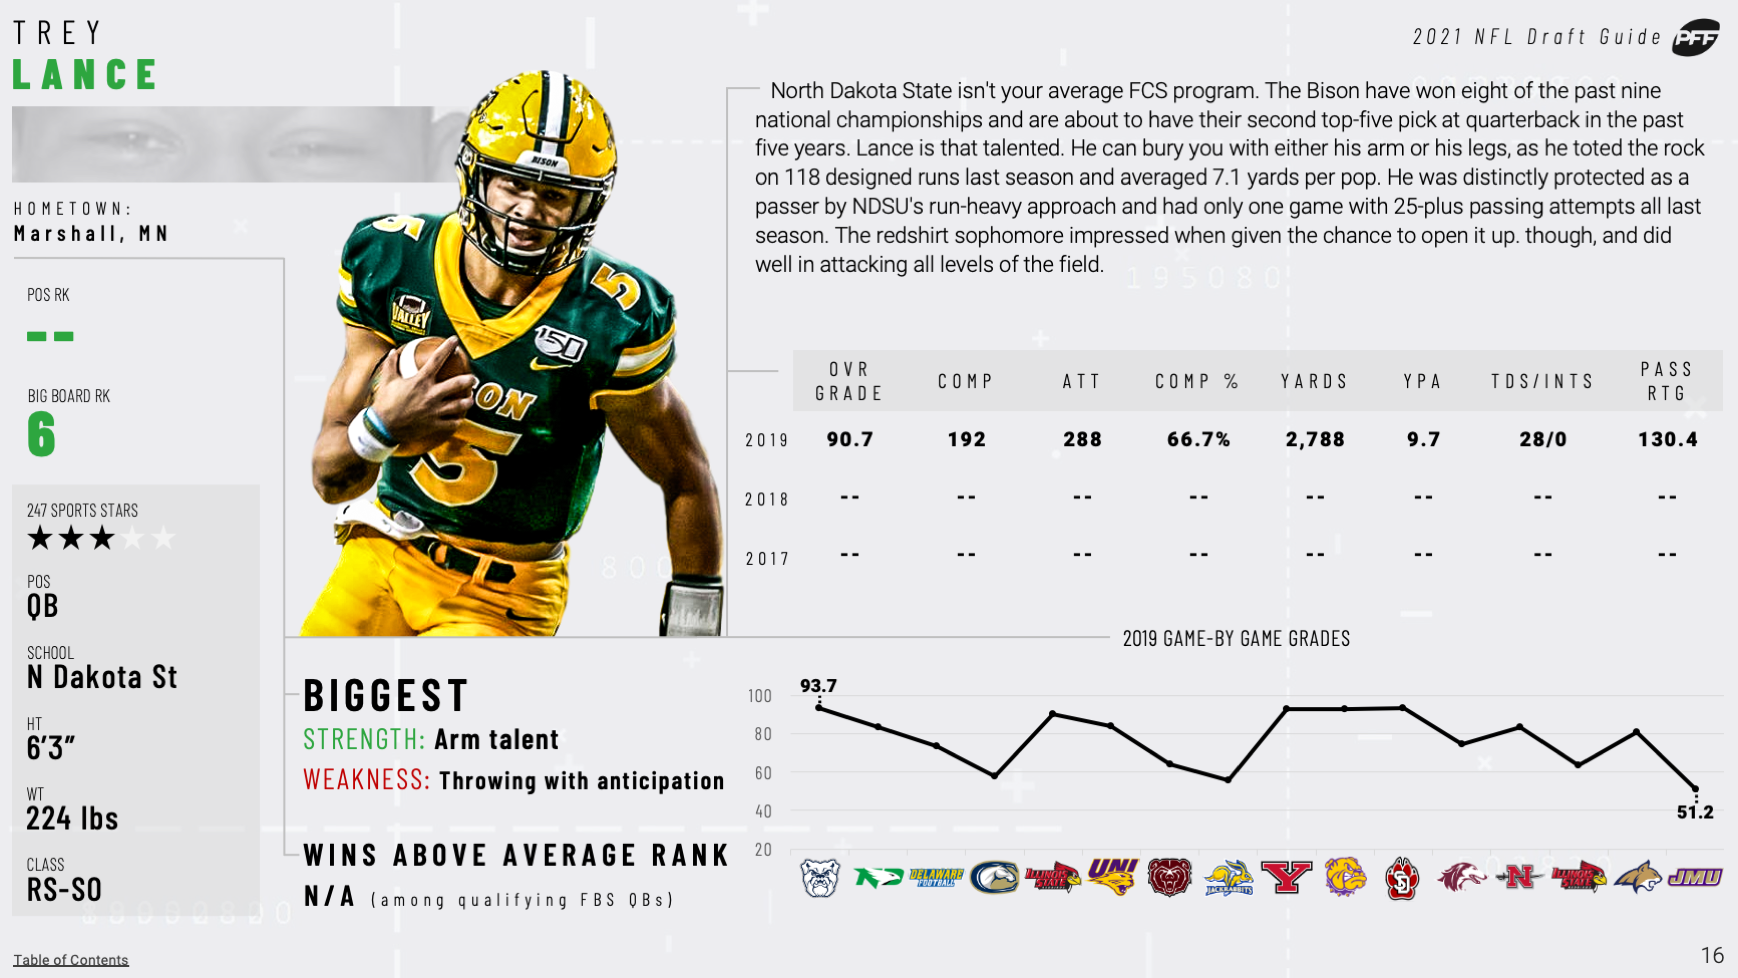 PFF 2021 NFL Draft Guide: PFF's top interior defensive line